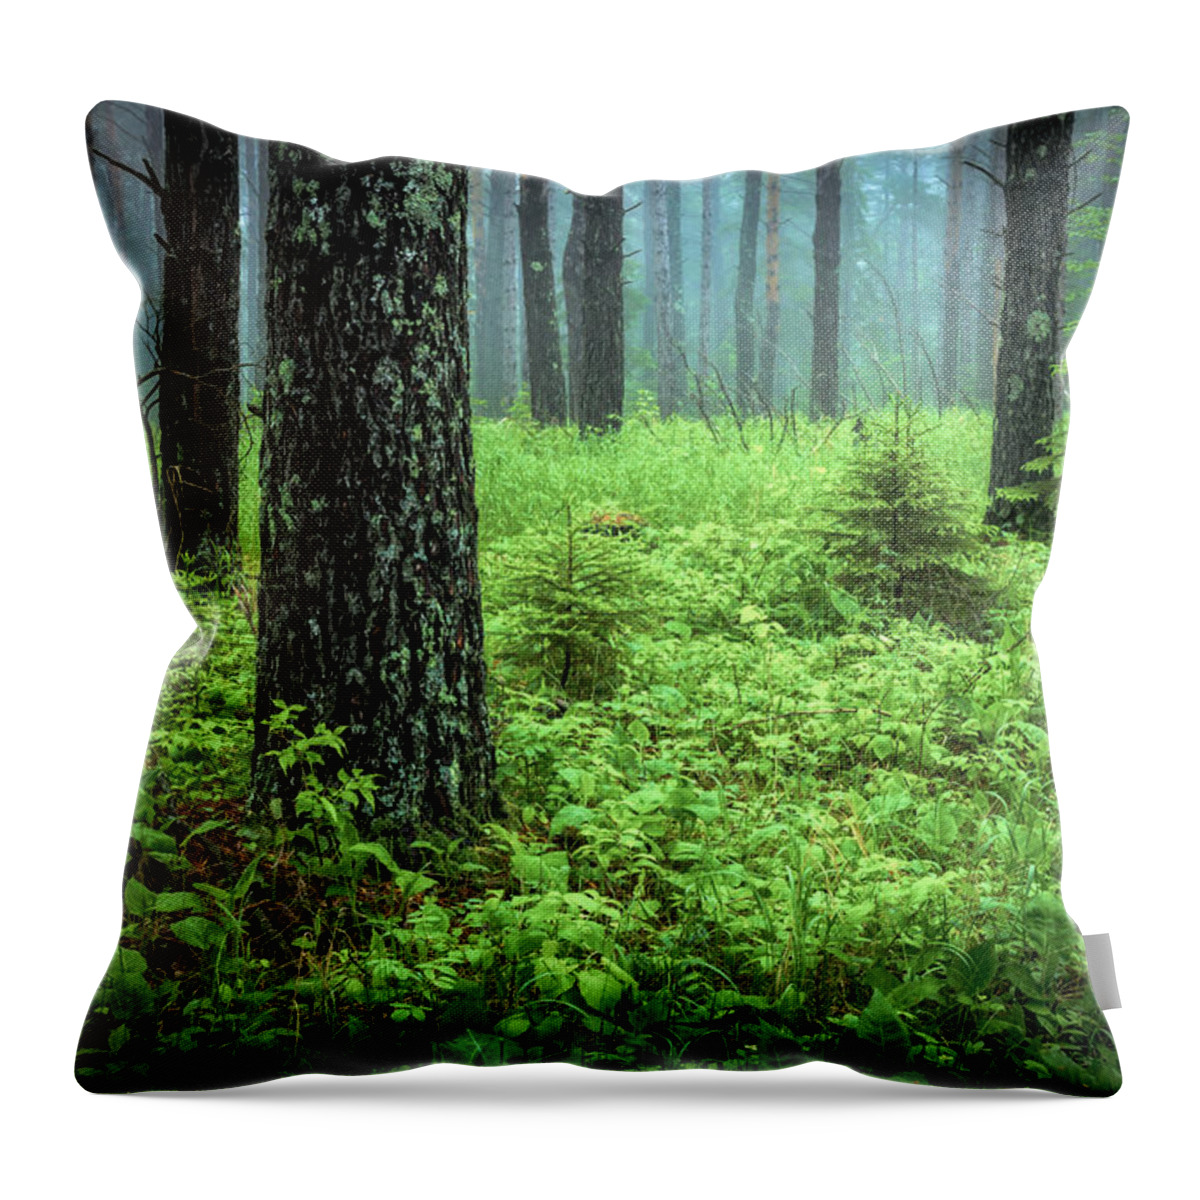 Solstice Glow Solstice Woods Green Trees Forest Fog Mist Hawk Ridge Duluth Minnesota Summer Lake Superior Summer Solstice Lush Magic Nature Greeting Cards Mary Amerman Throw Pillow featuring the photograph Whispering Woods #1 by Mary Amerman